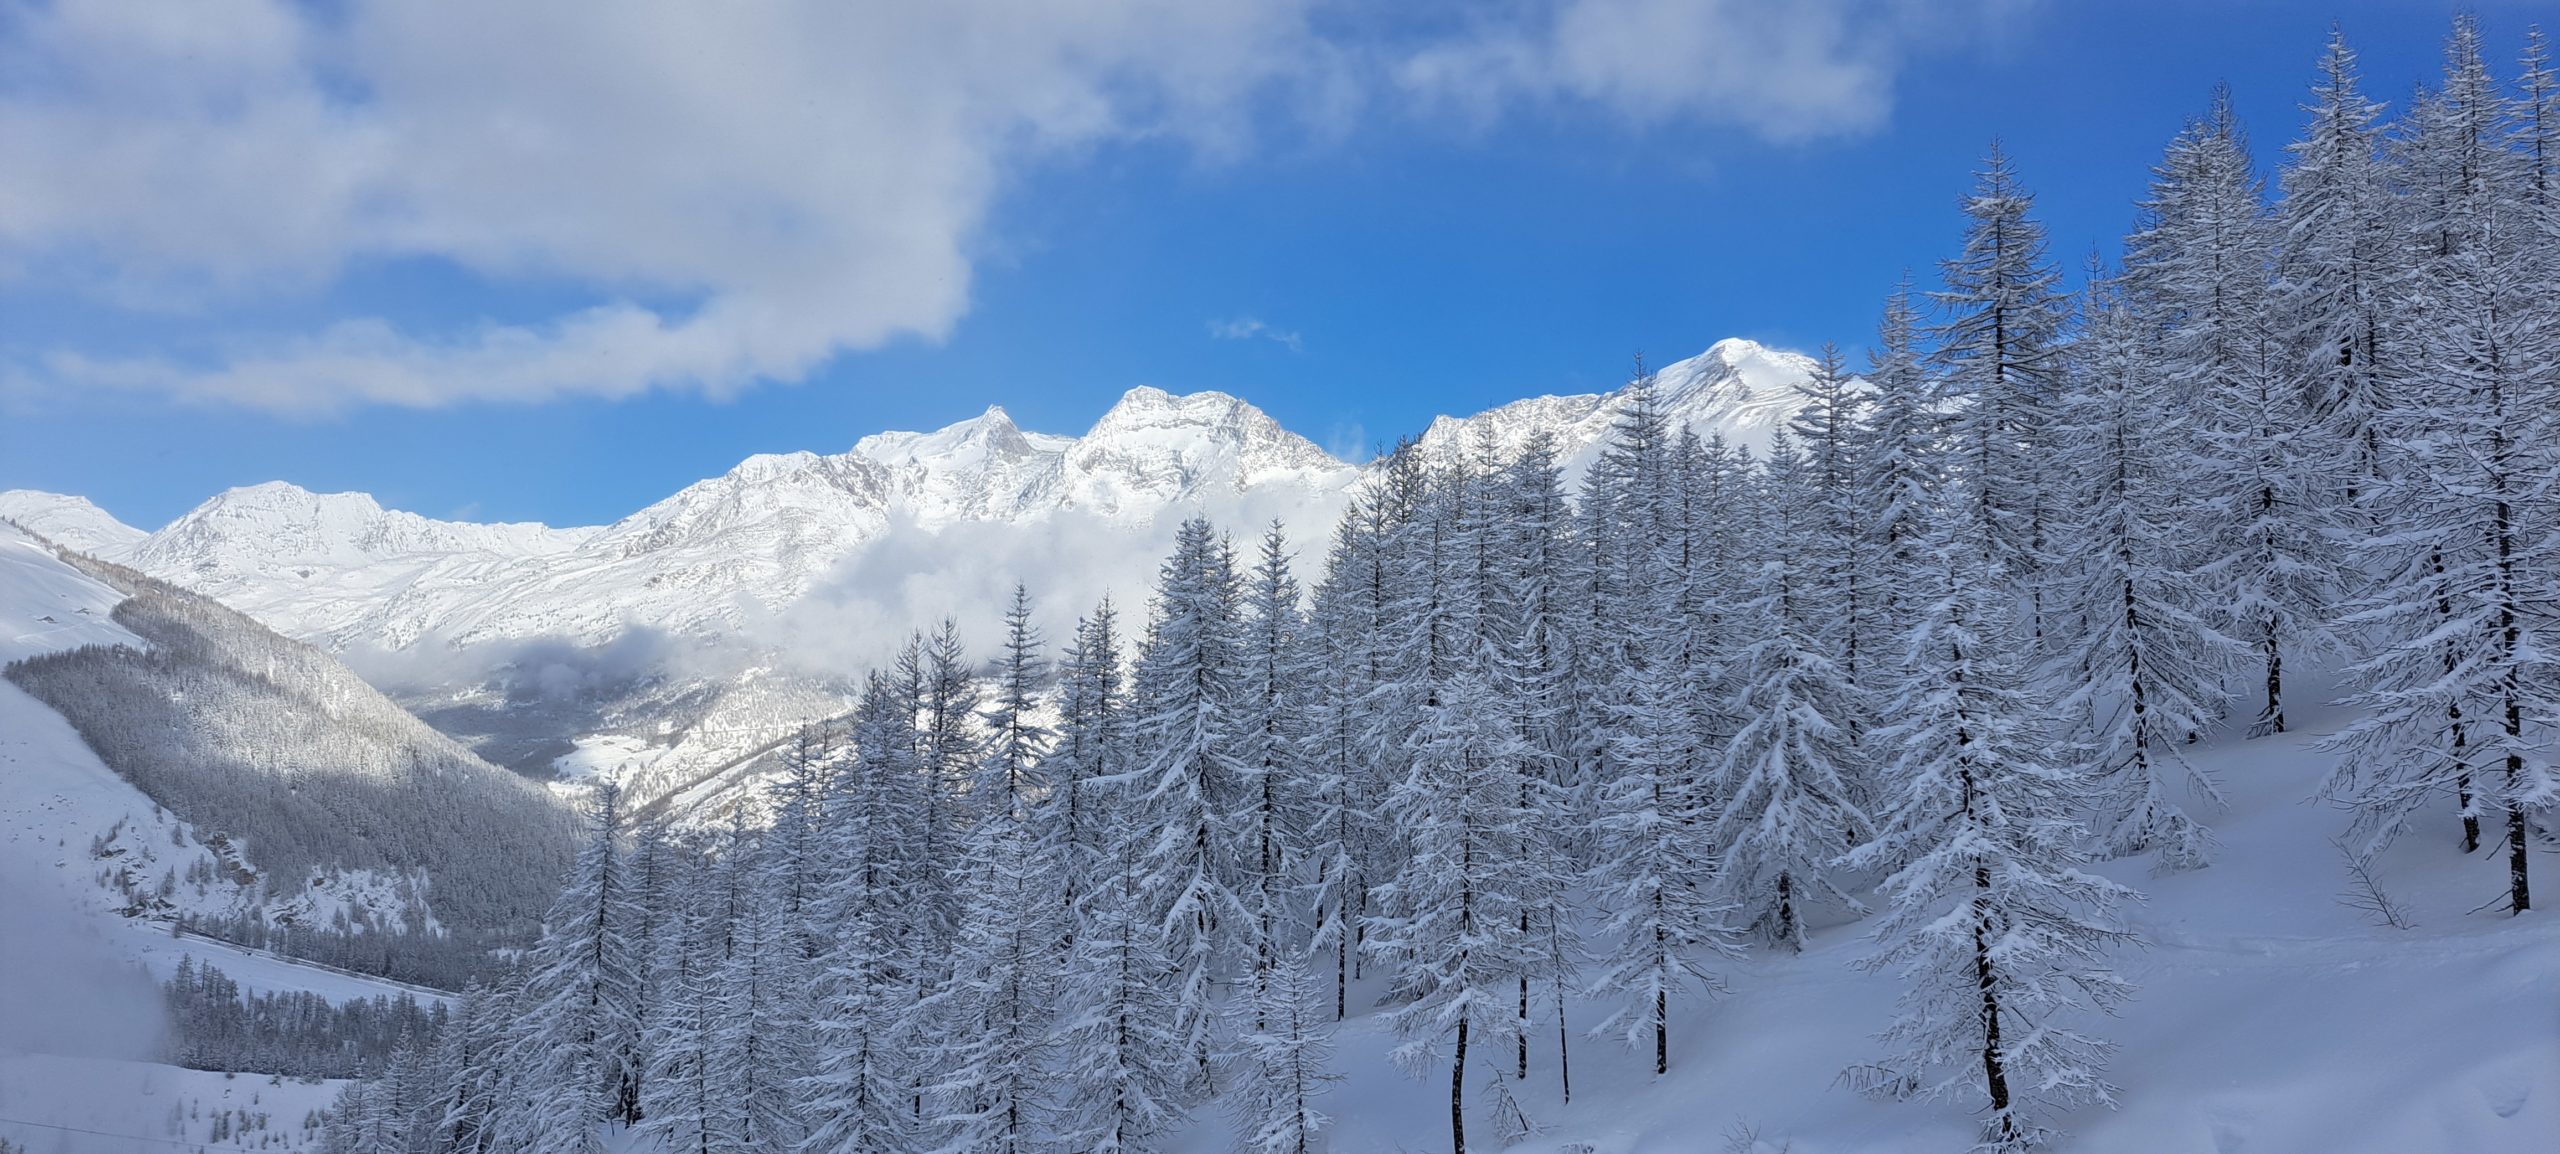 An enchanting landscape with snow on the fir trees beside the ski slopes of Saas-Fee in Switzerland